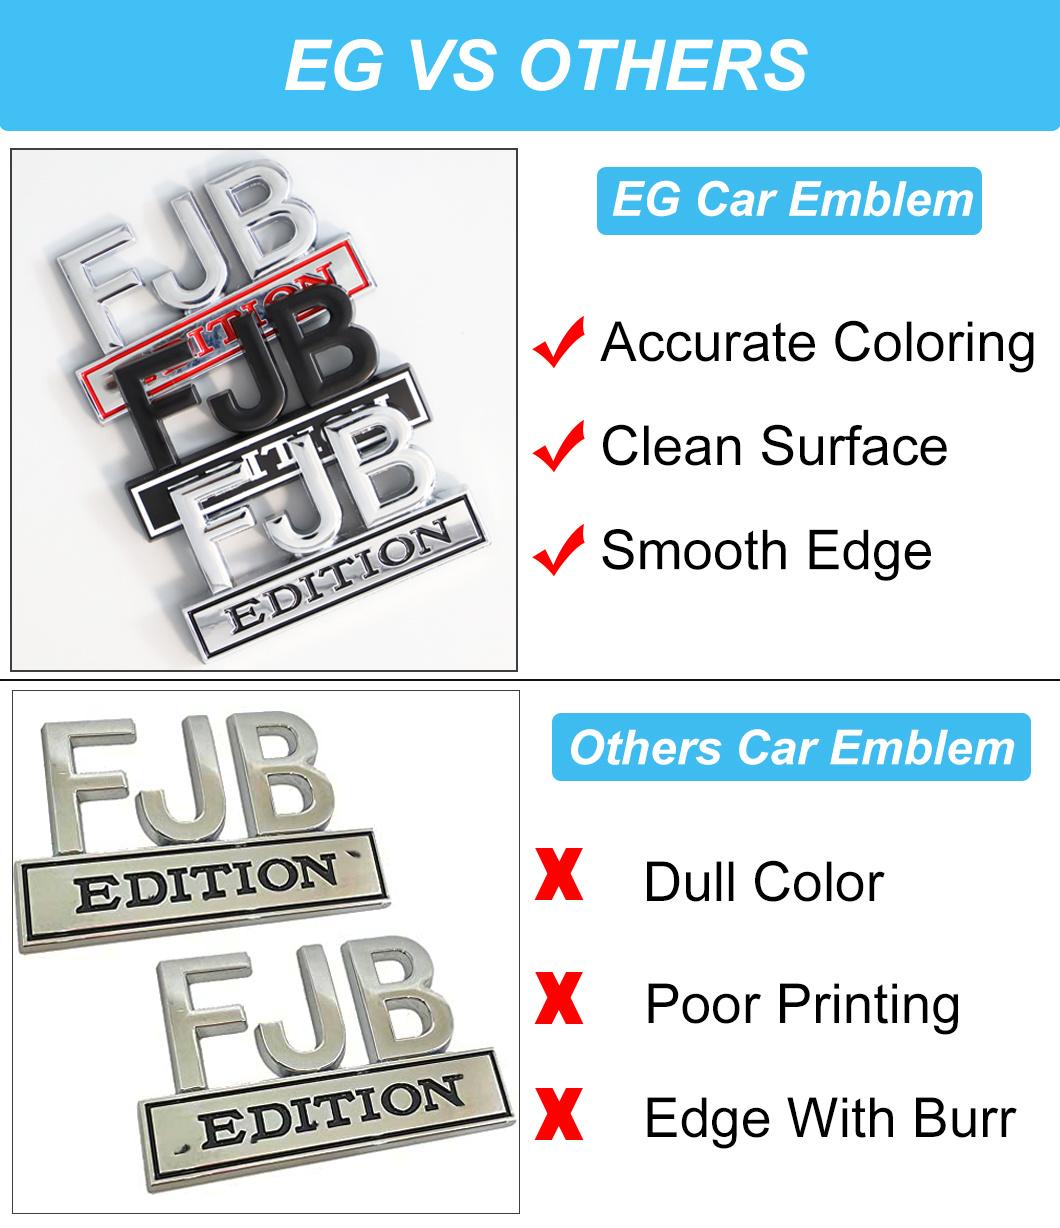 Custom Fjb Emblems for Car with Over 25 Years Experience and ISO Certs